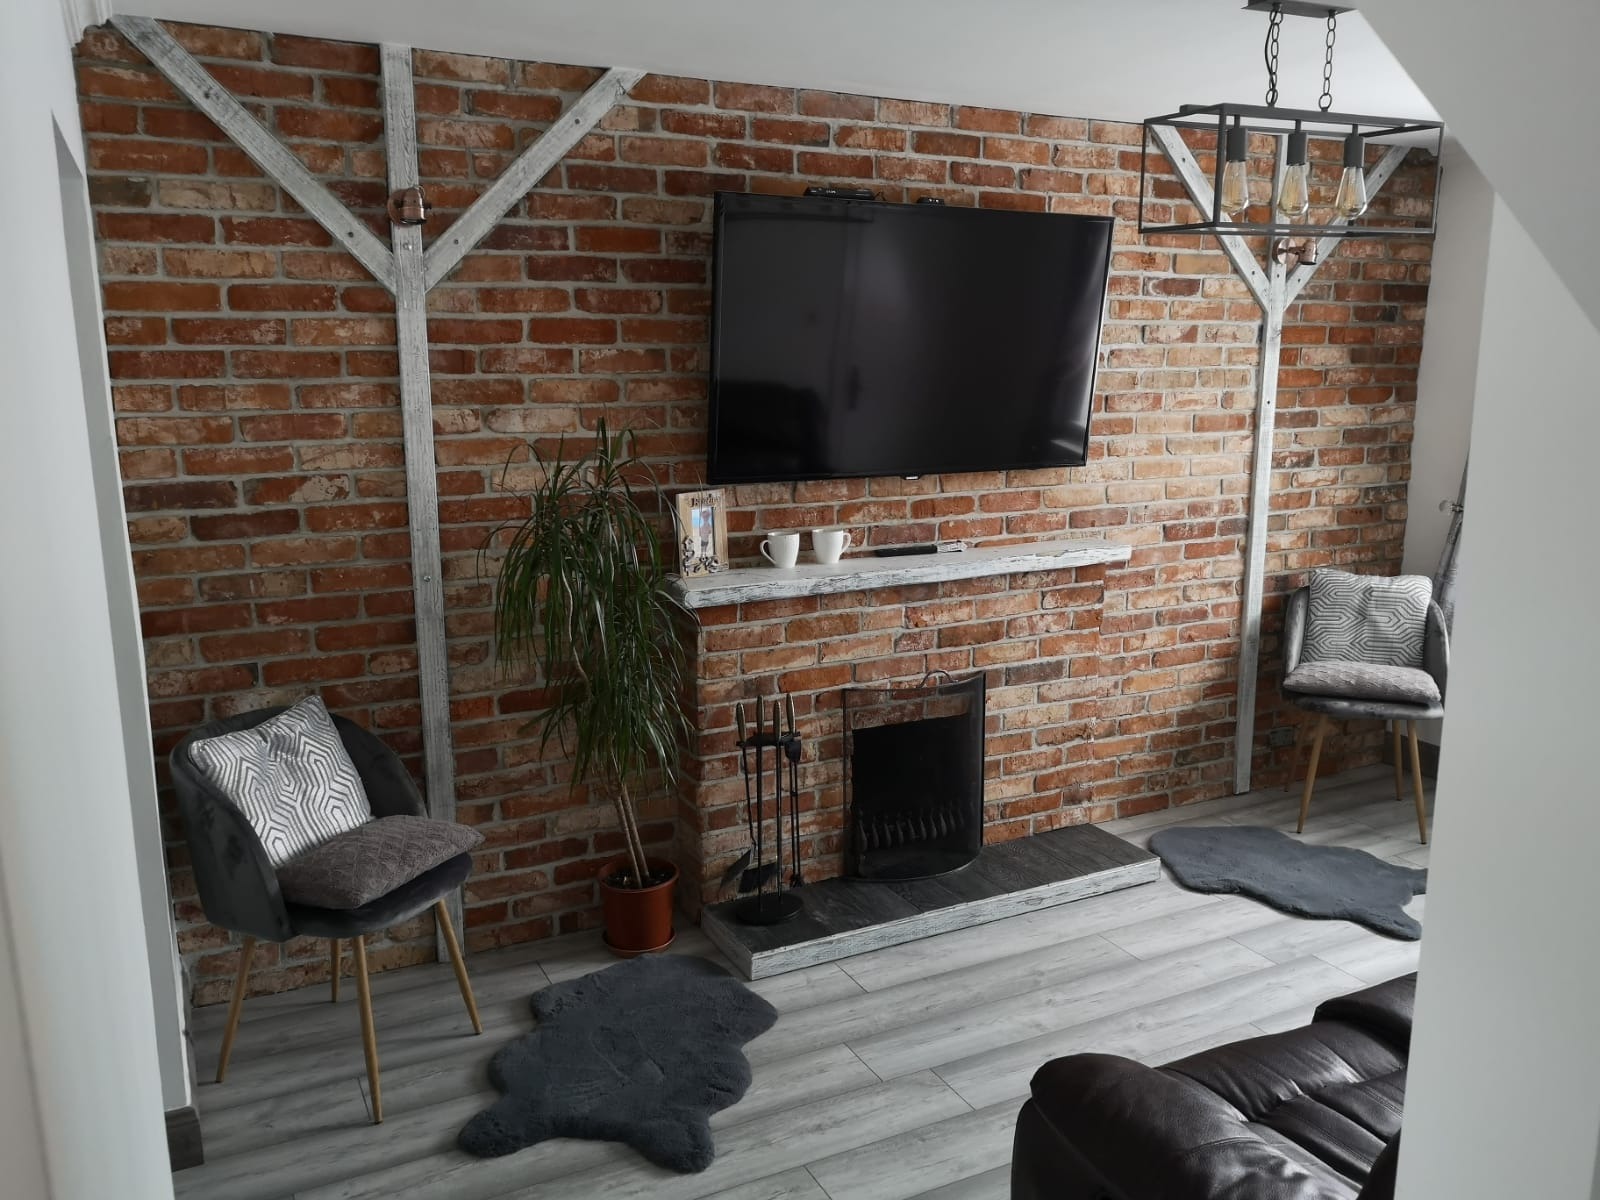 Creating a Cozy Fireplace with XVIII Century Reclaimed Brick Slips: A Customer's Project Completed with Our Authentic Materials